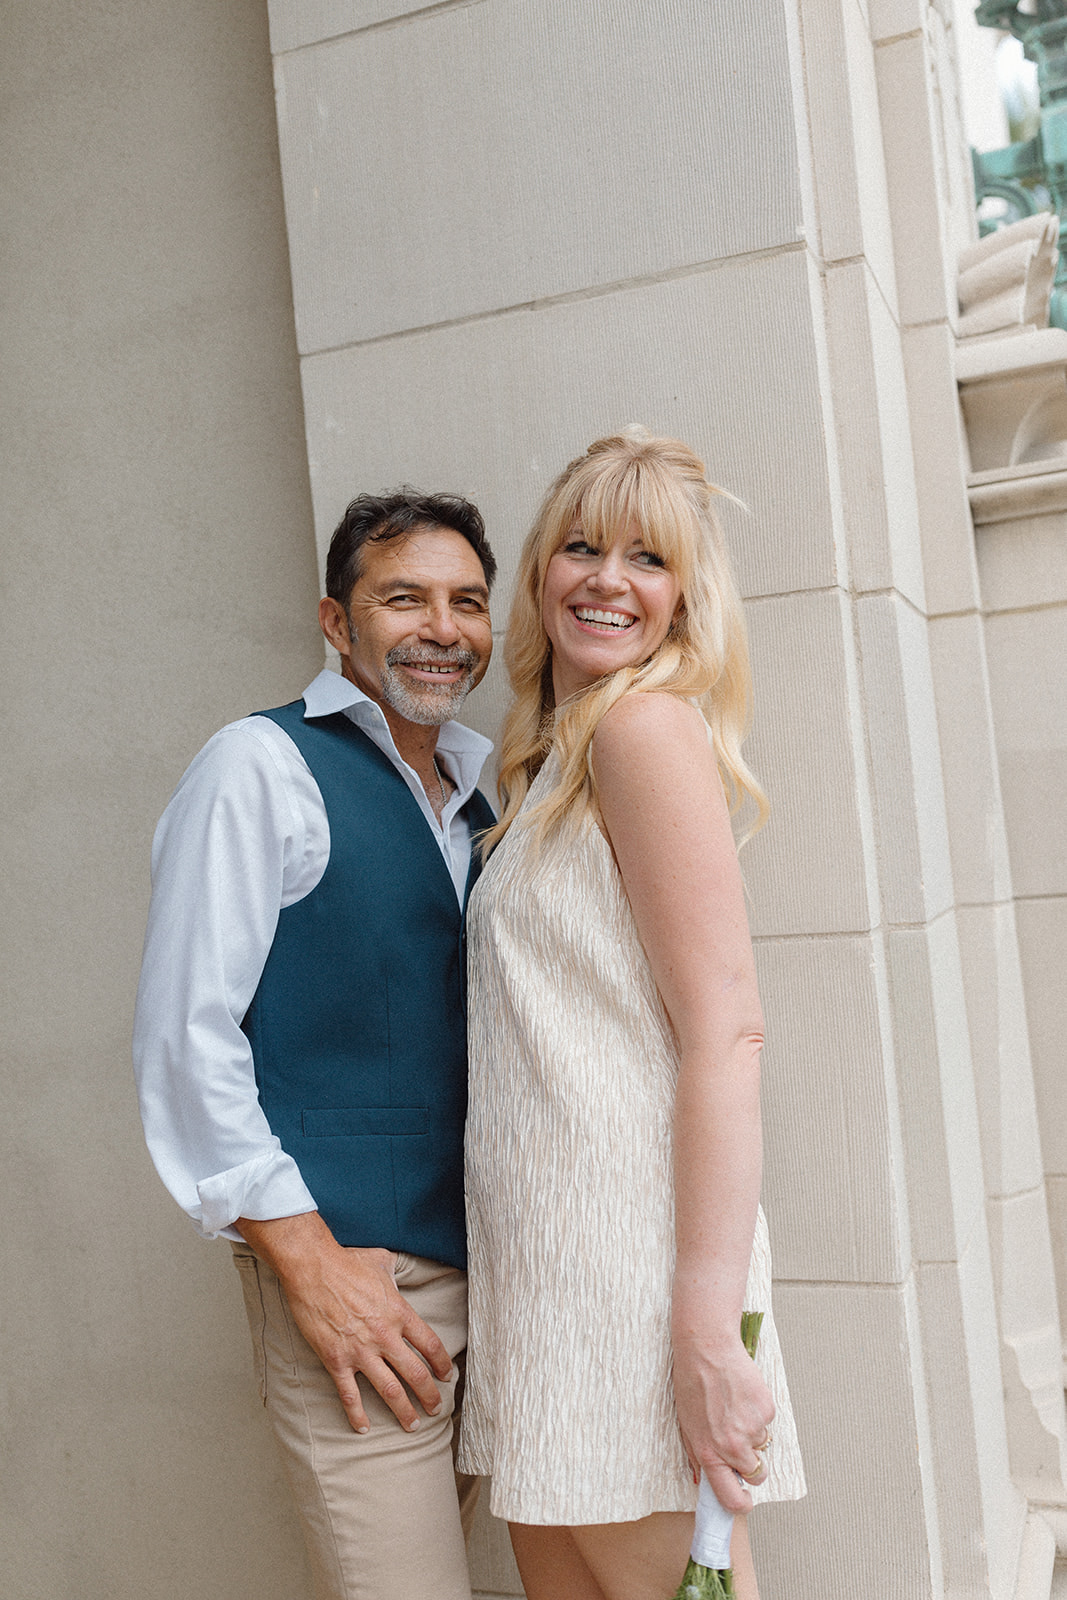 Intimate elopement at the Beverly Hills Courthouse